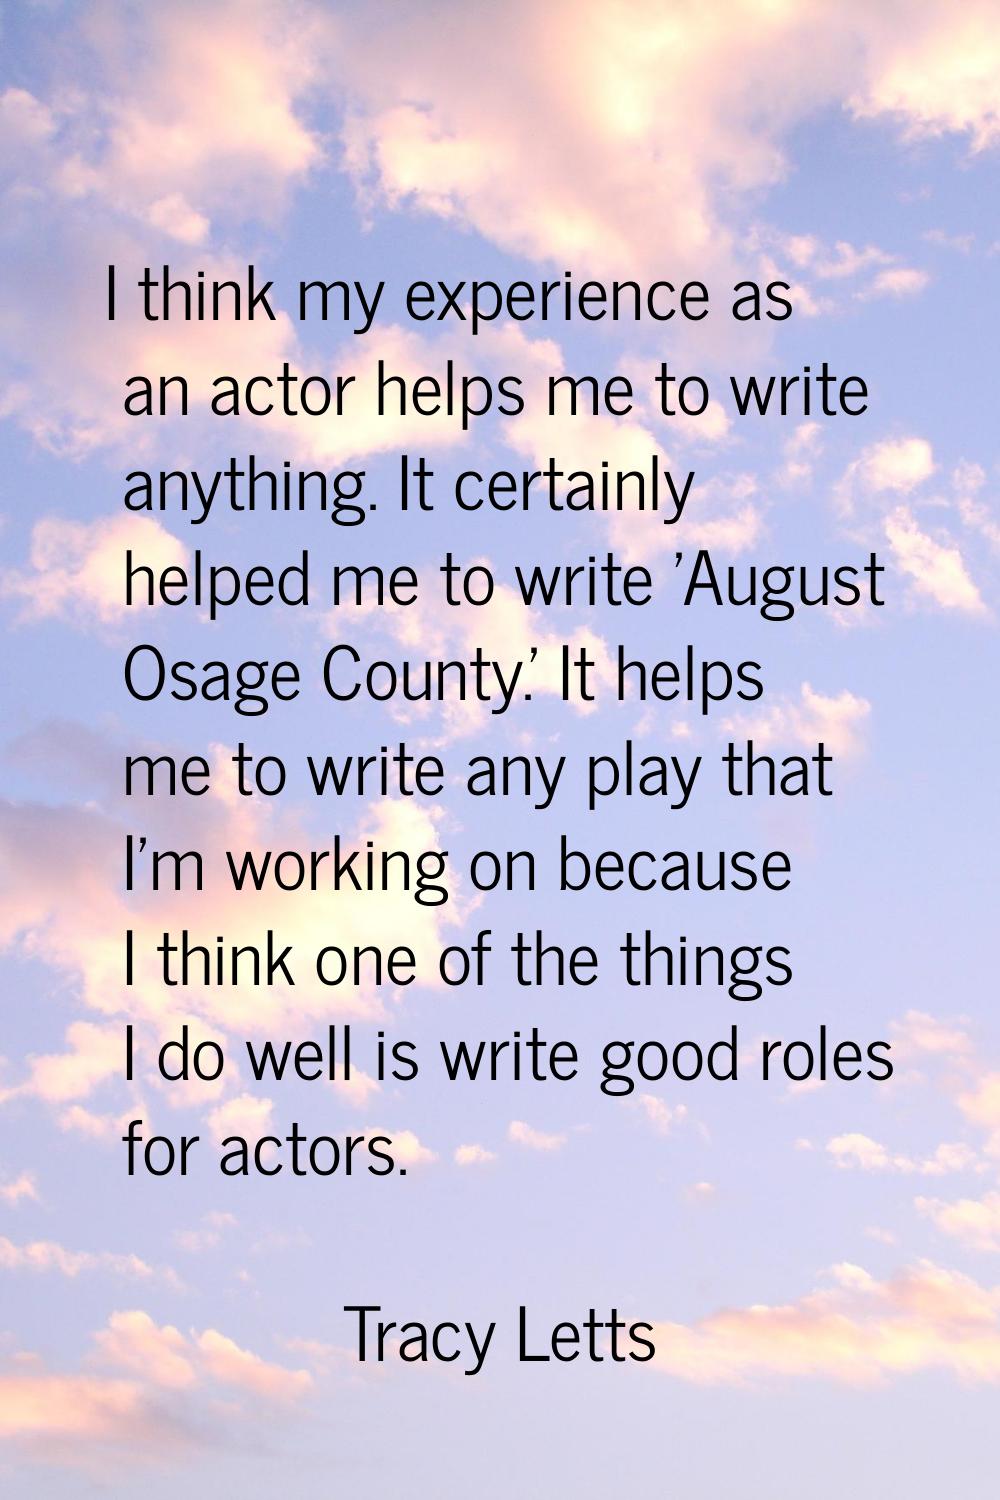 I think my experience as an actor helps me to write anything. It certainly helped me to write 'Augu